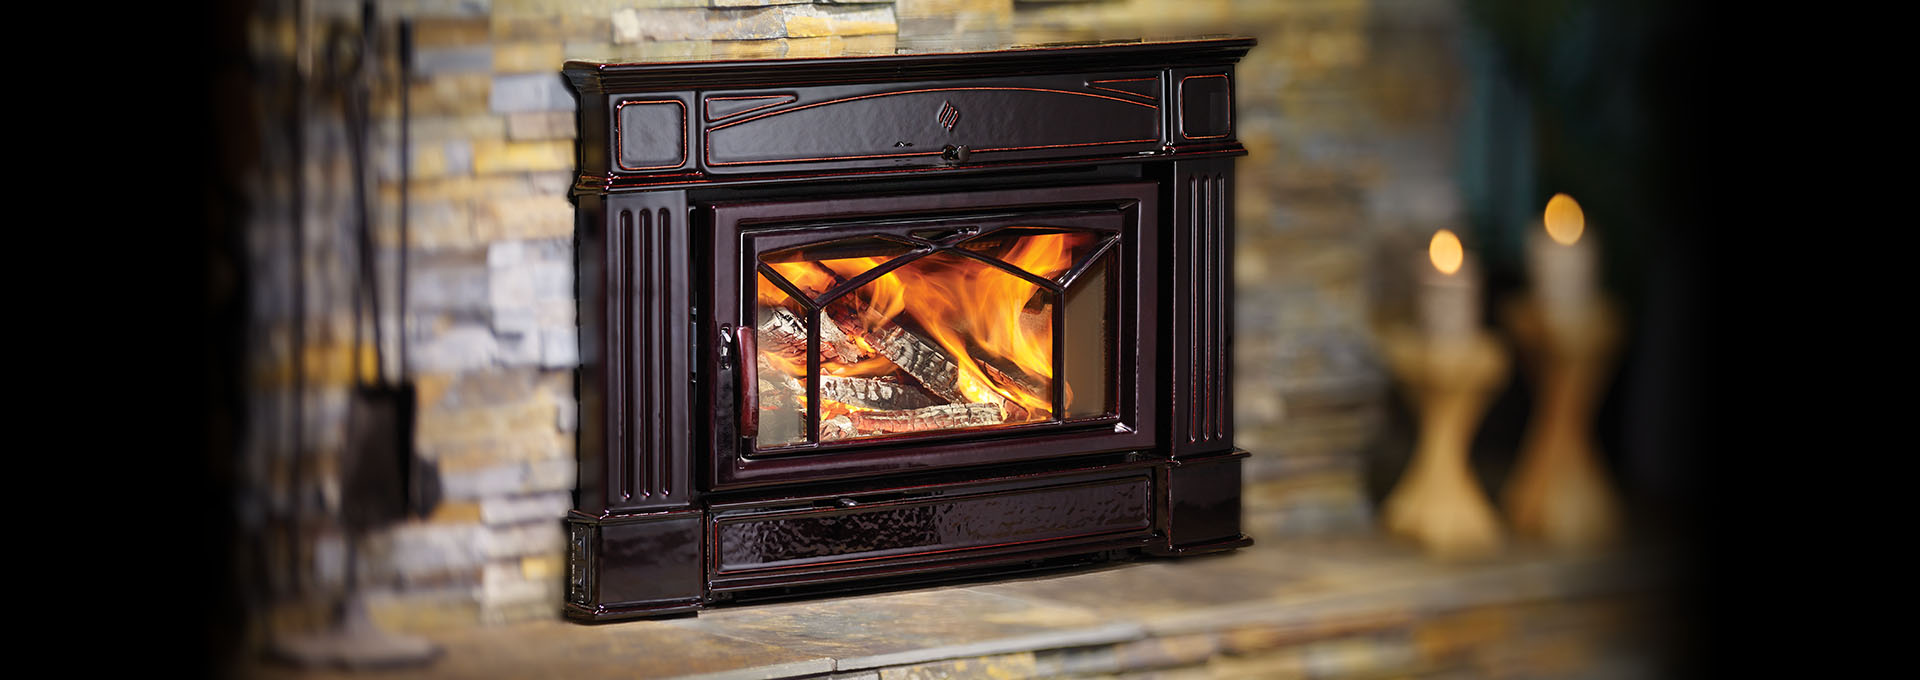 Electric Fireplace Insert with Heater Beautiful Wood Inserts Epa Certified